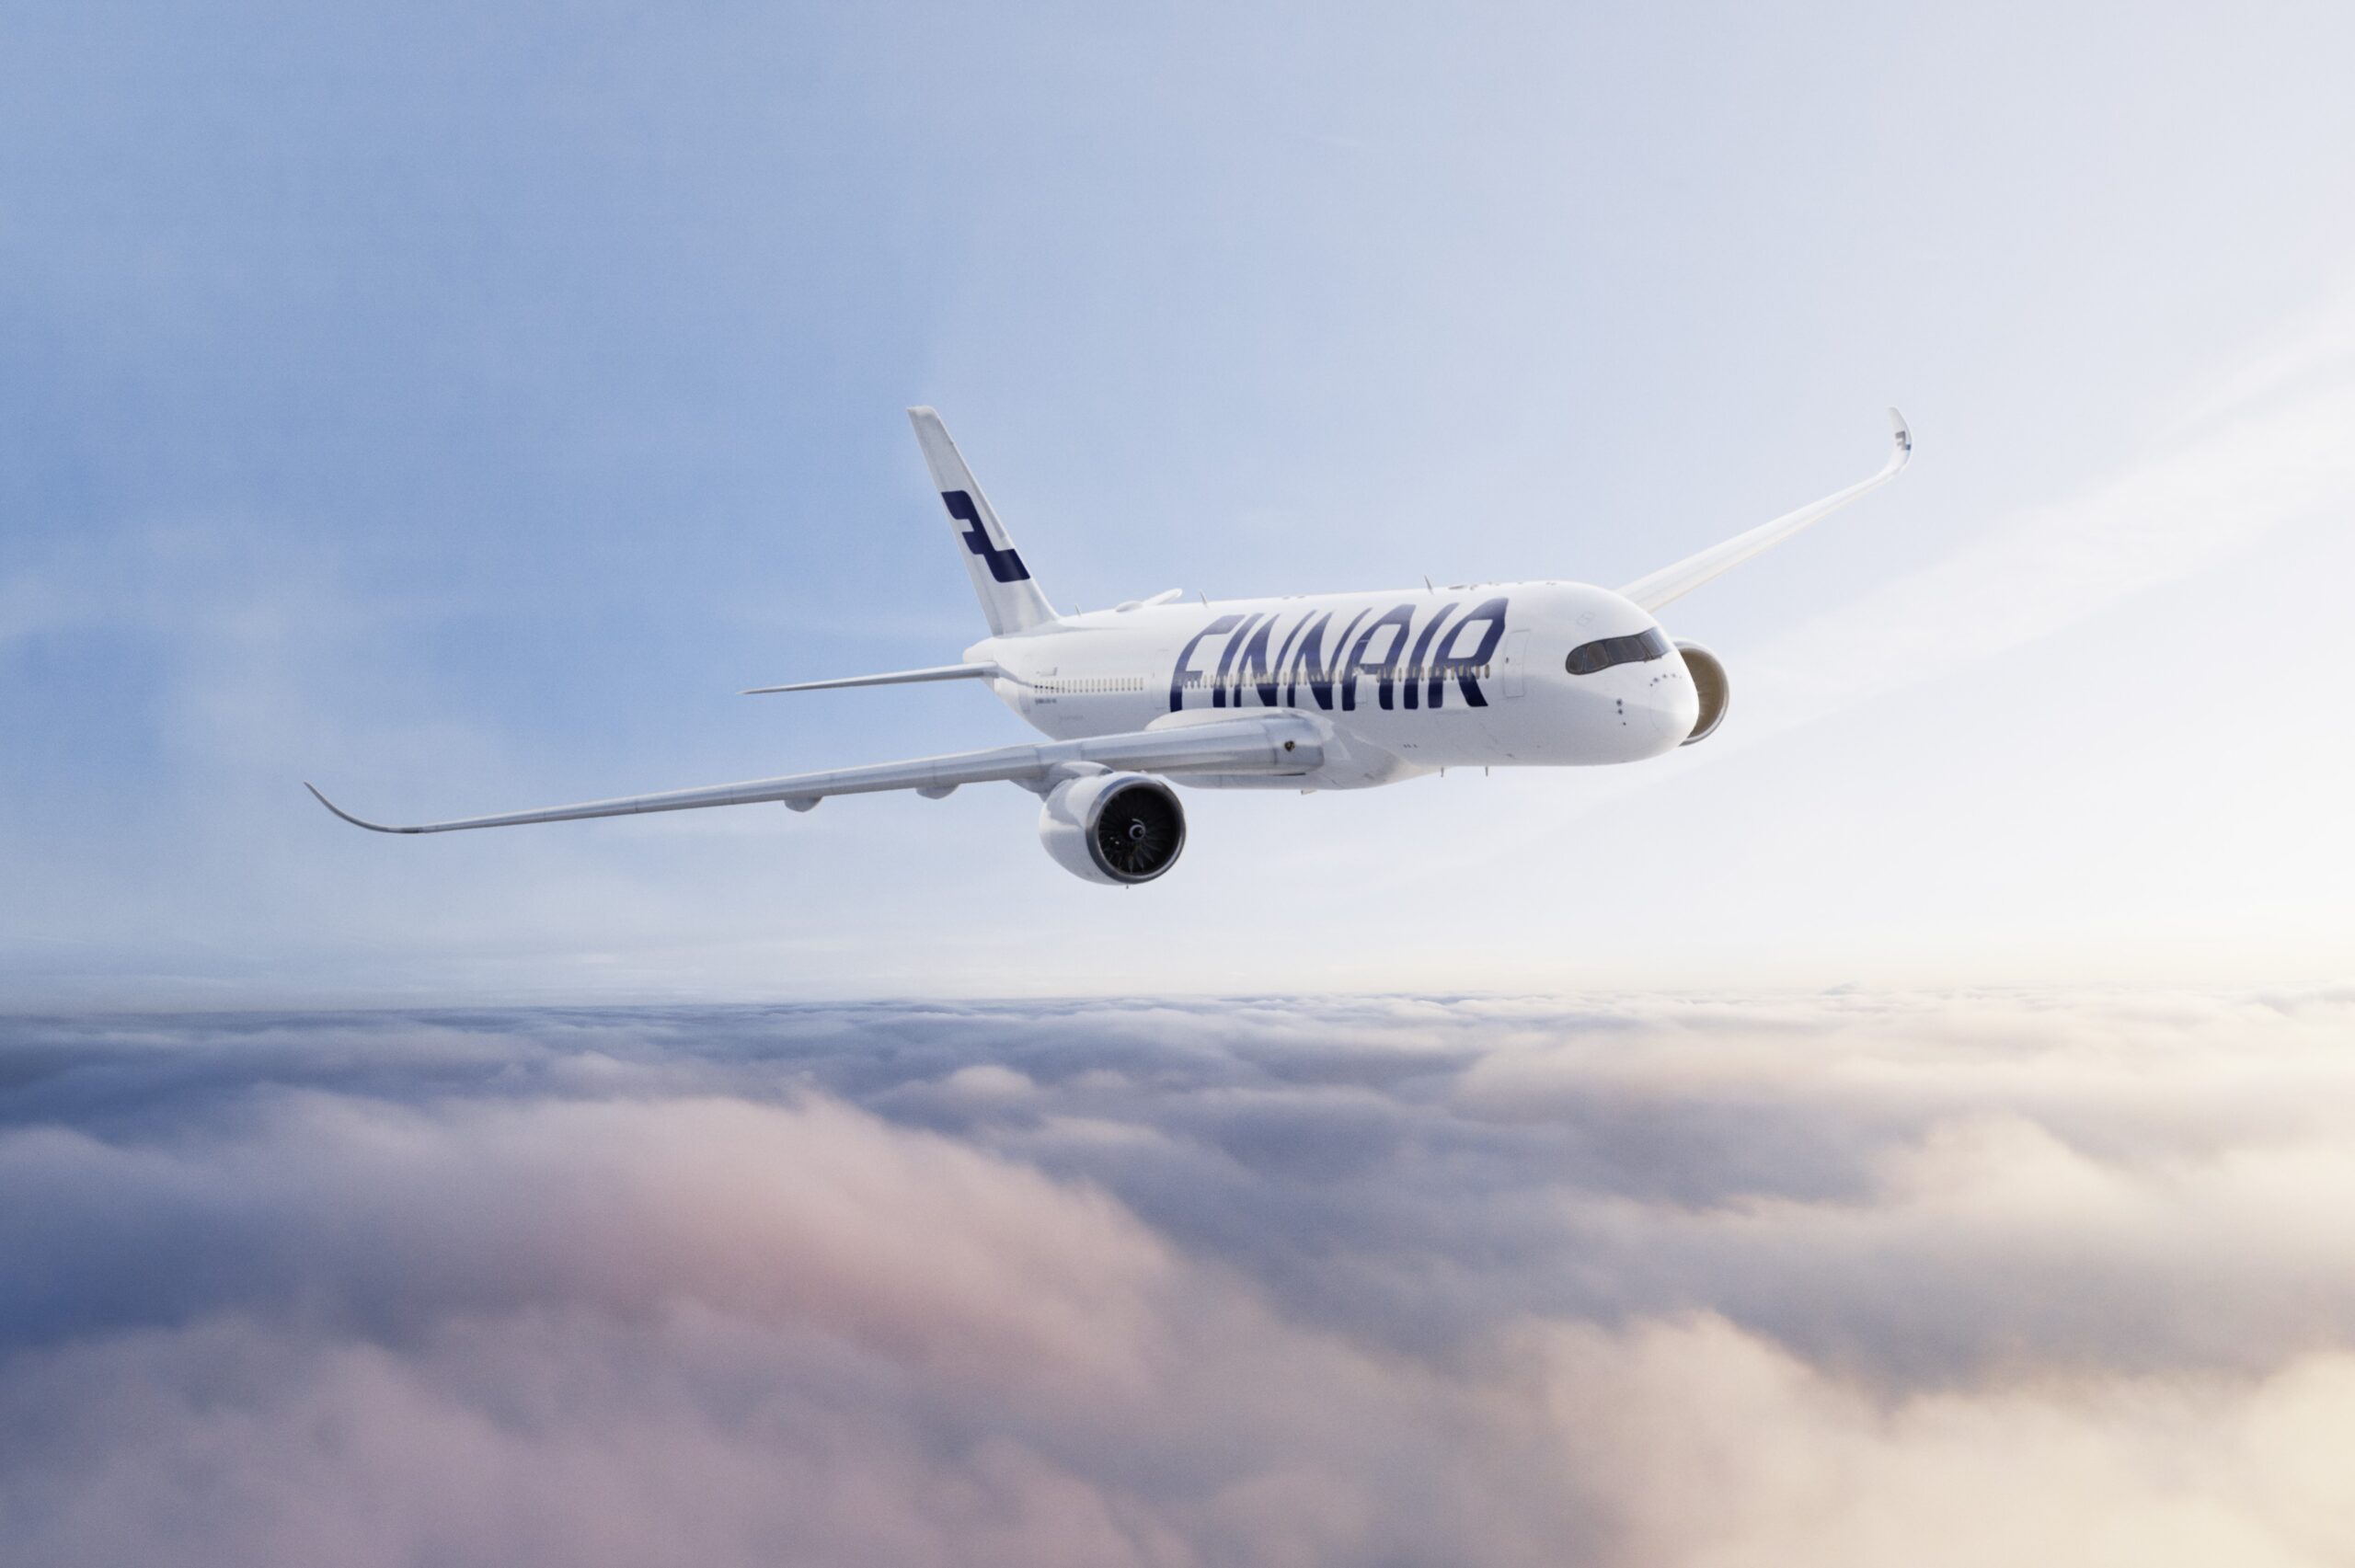 Sabre and Finnair launch NDC content to Sabre-connected travel agents